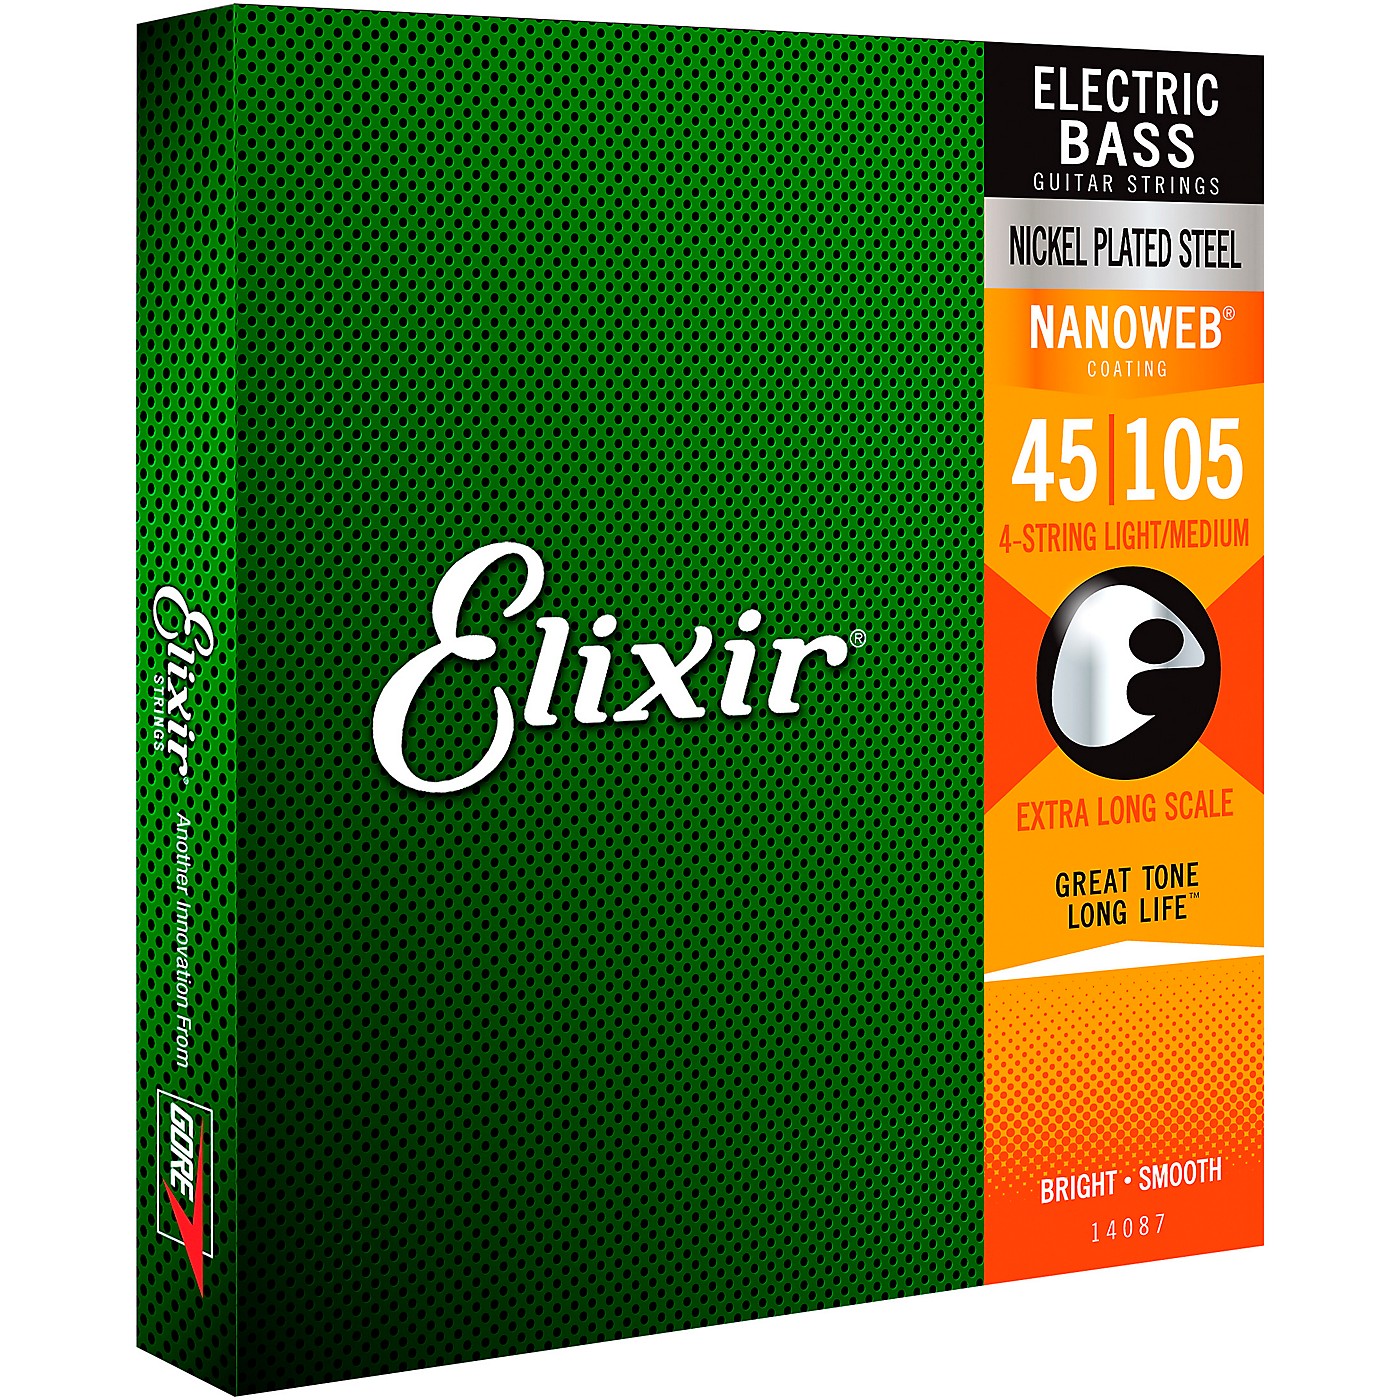 Elixir Nickel-Plated Steel 4-String Bass Strings with NANOWEB Coating, Extra Long Scale, Light/Medium (.045-.105) thumbnail